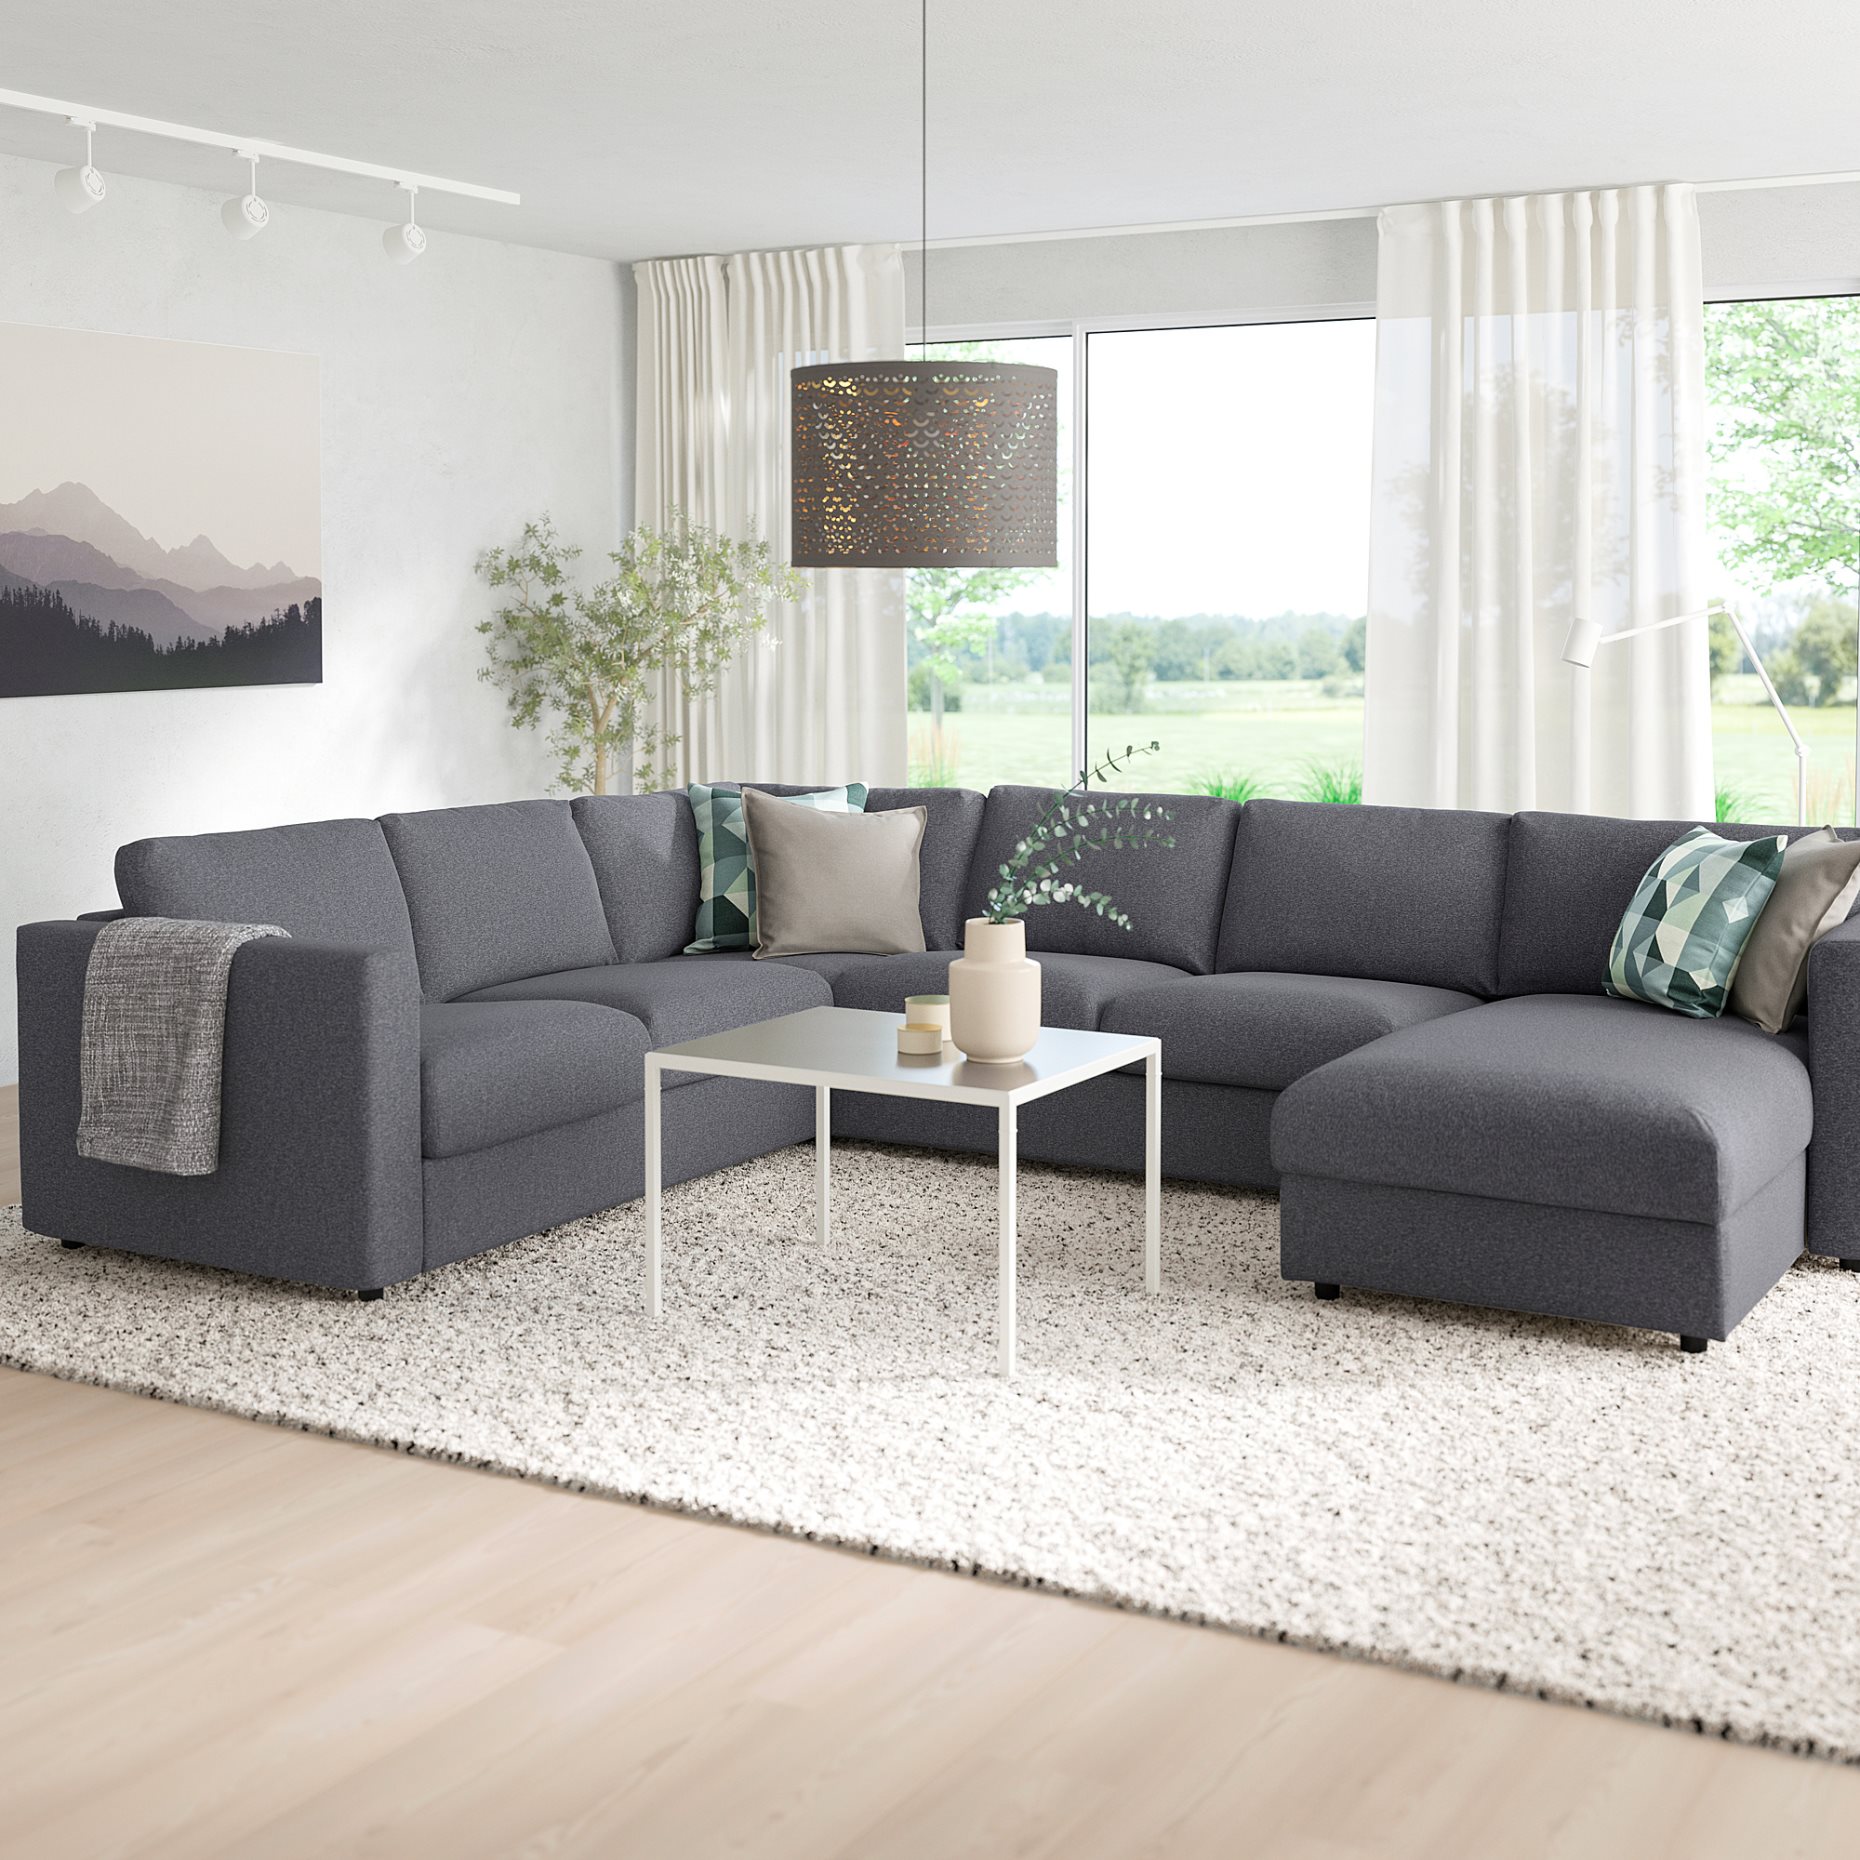 VIMLE, corner sofa-bed, 5-seat with chaise longue, 095.452.66